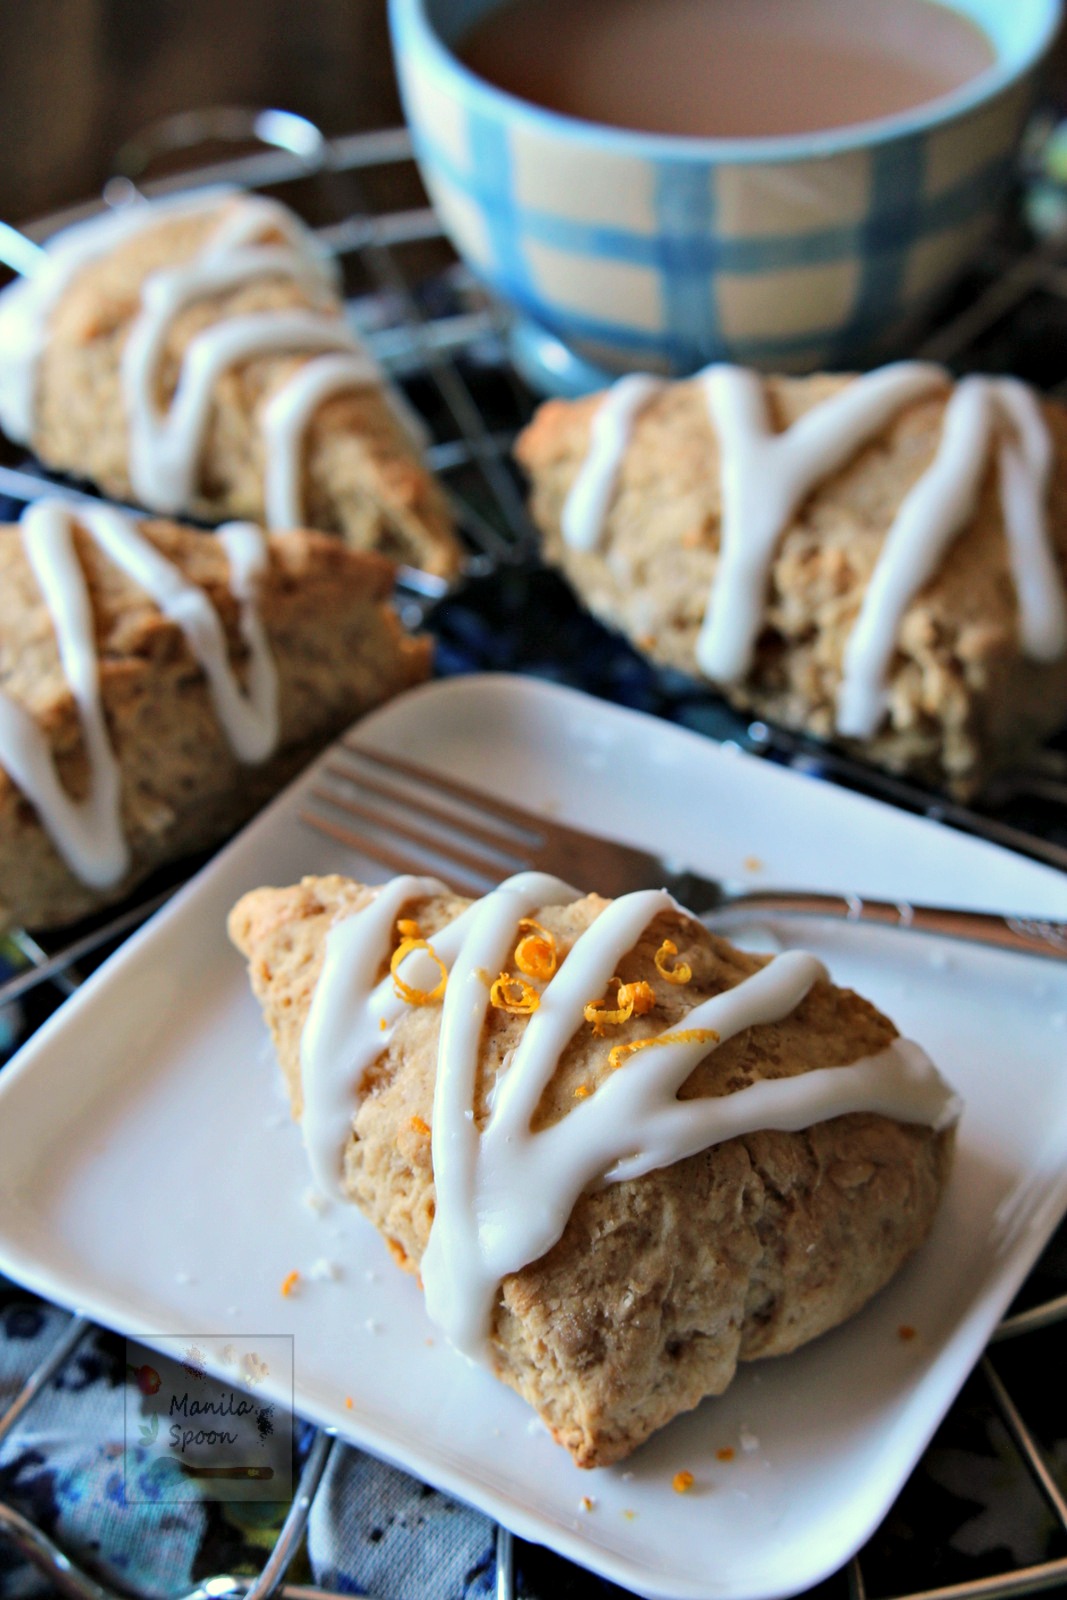 Packed with flavor and easy to make, these delicious Lemon Cardamom Scones are great with your coffee or tea. #lemonscones #cardamom #scones #cardamomscones #teatime | manilaspoon.com